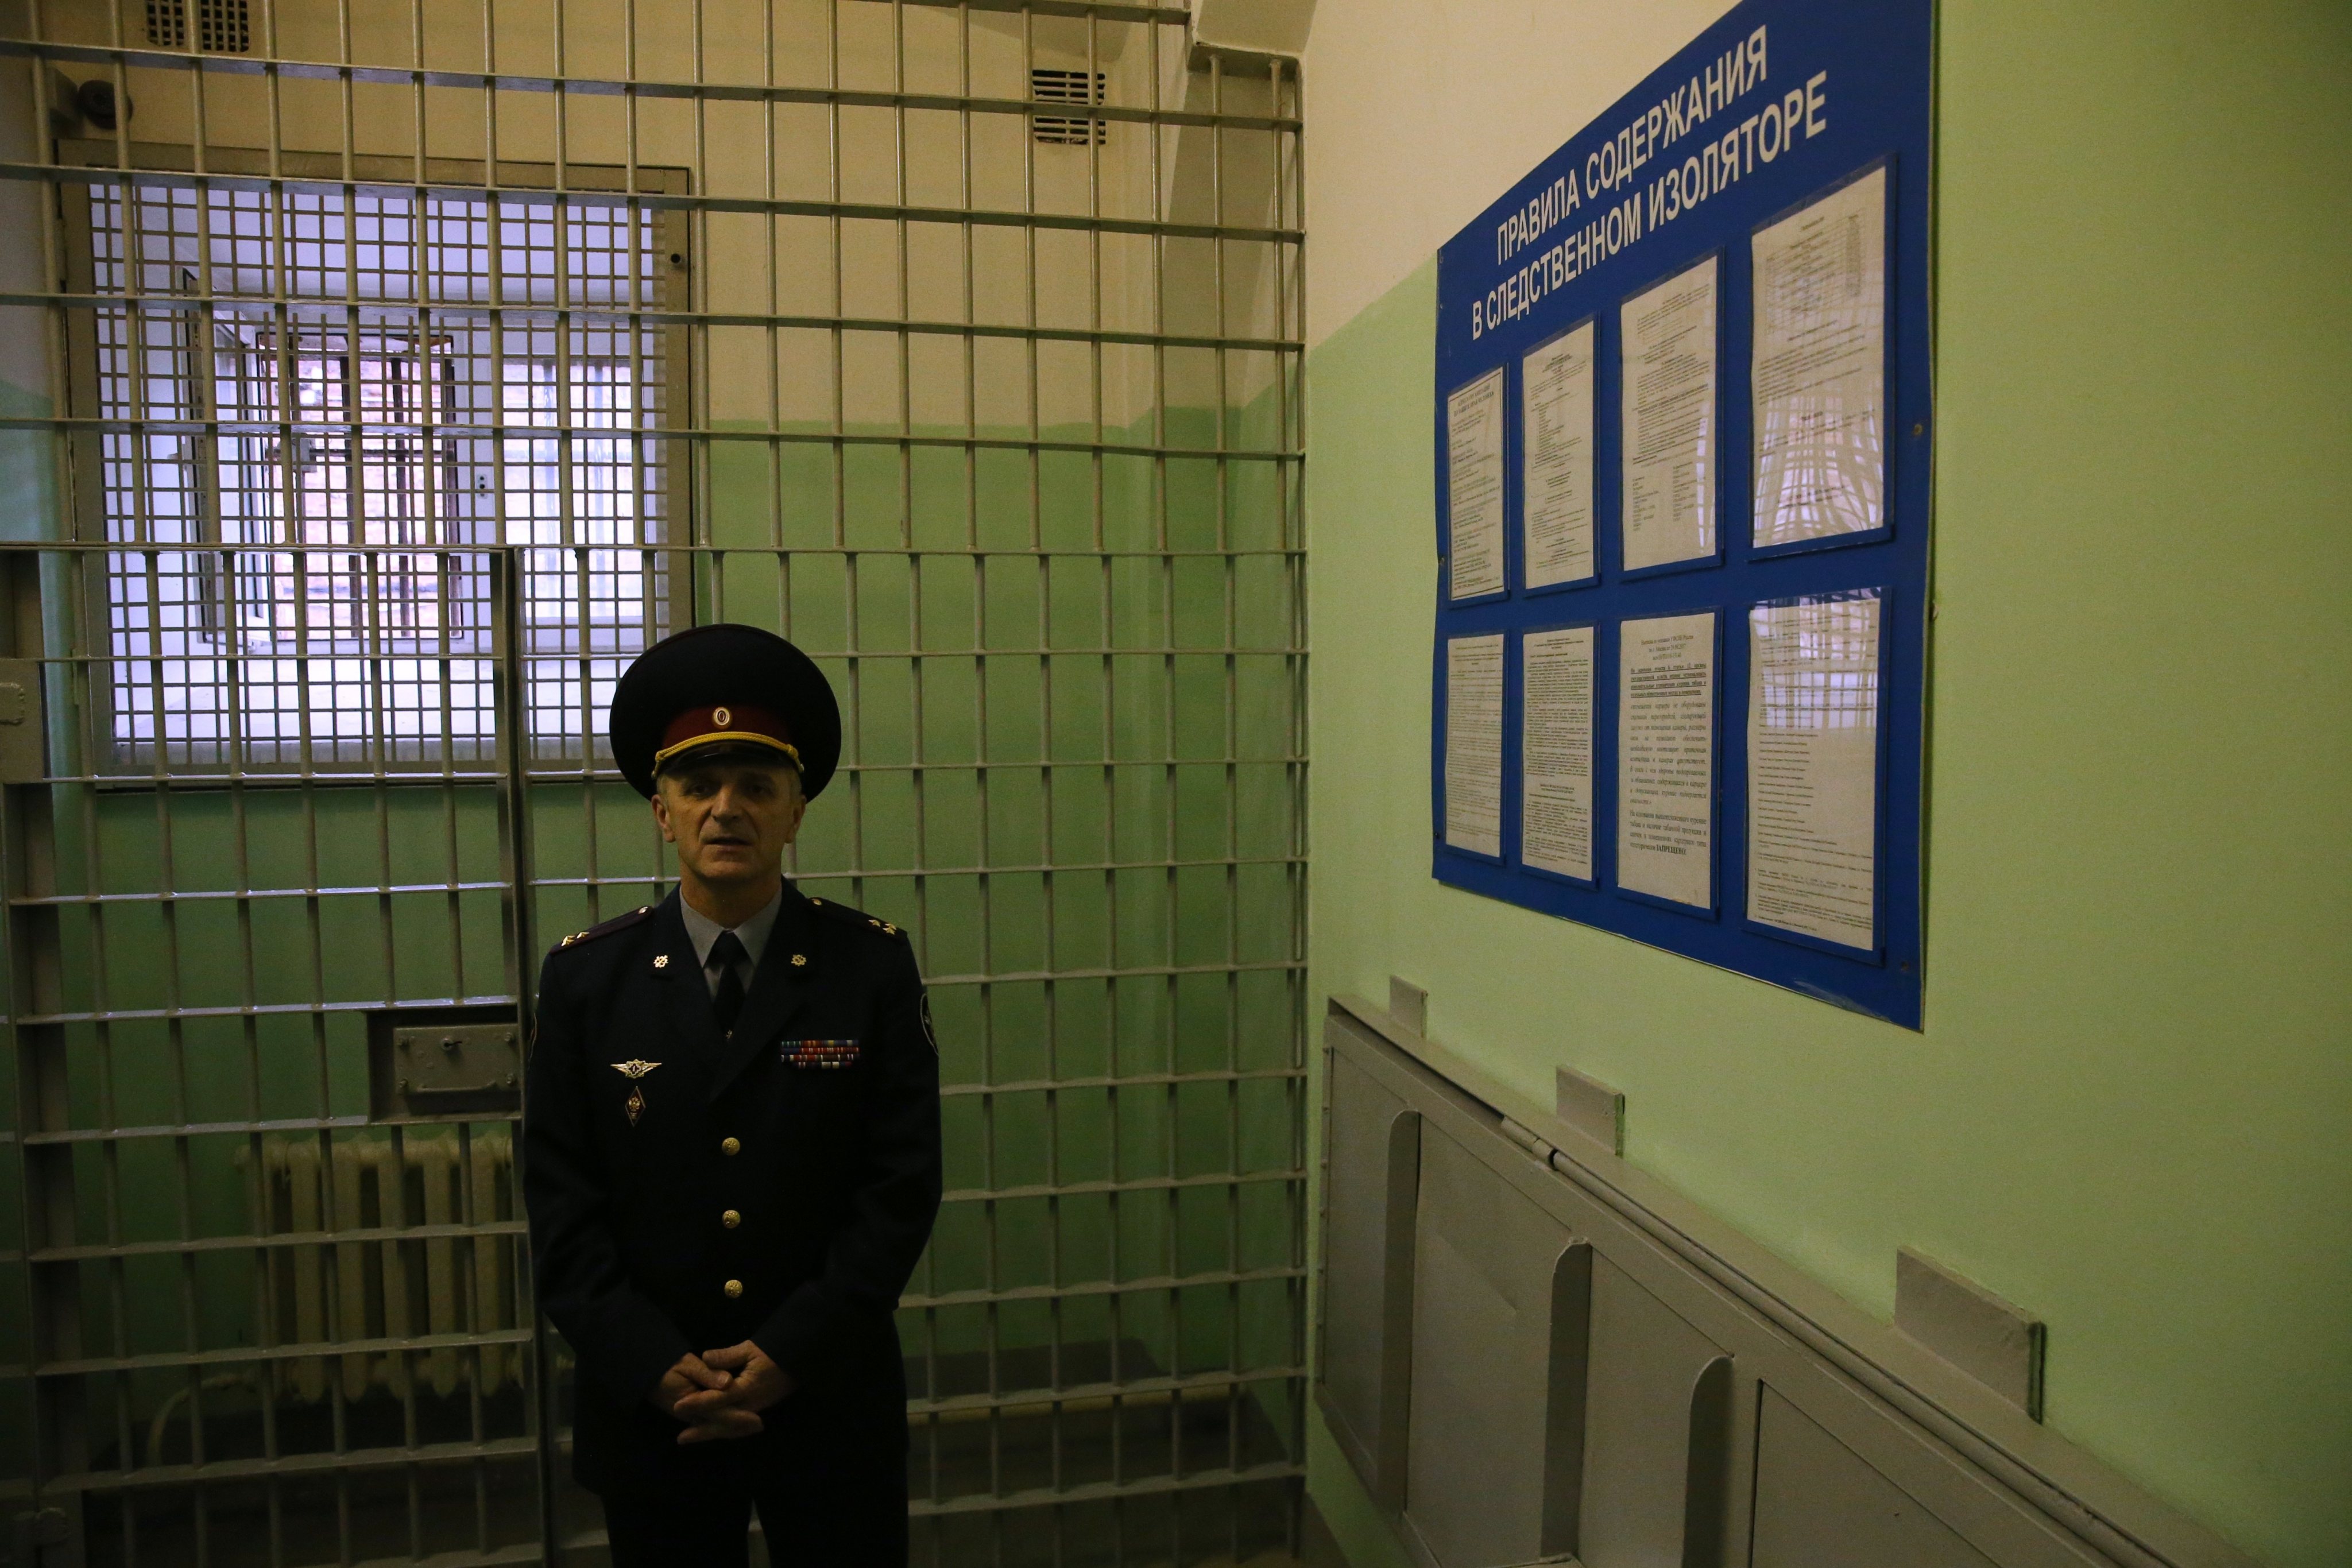 Press Tour Of Butyrka Prison In Moscow